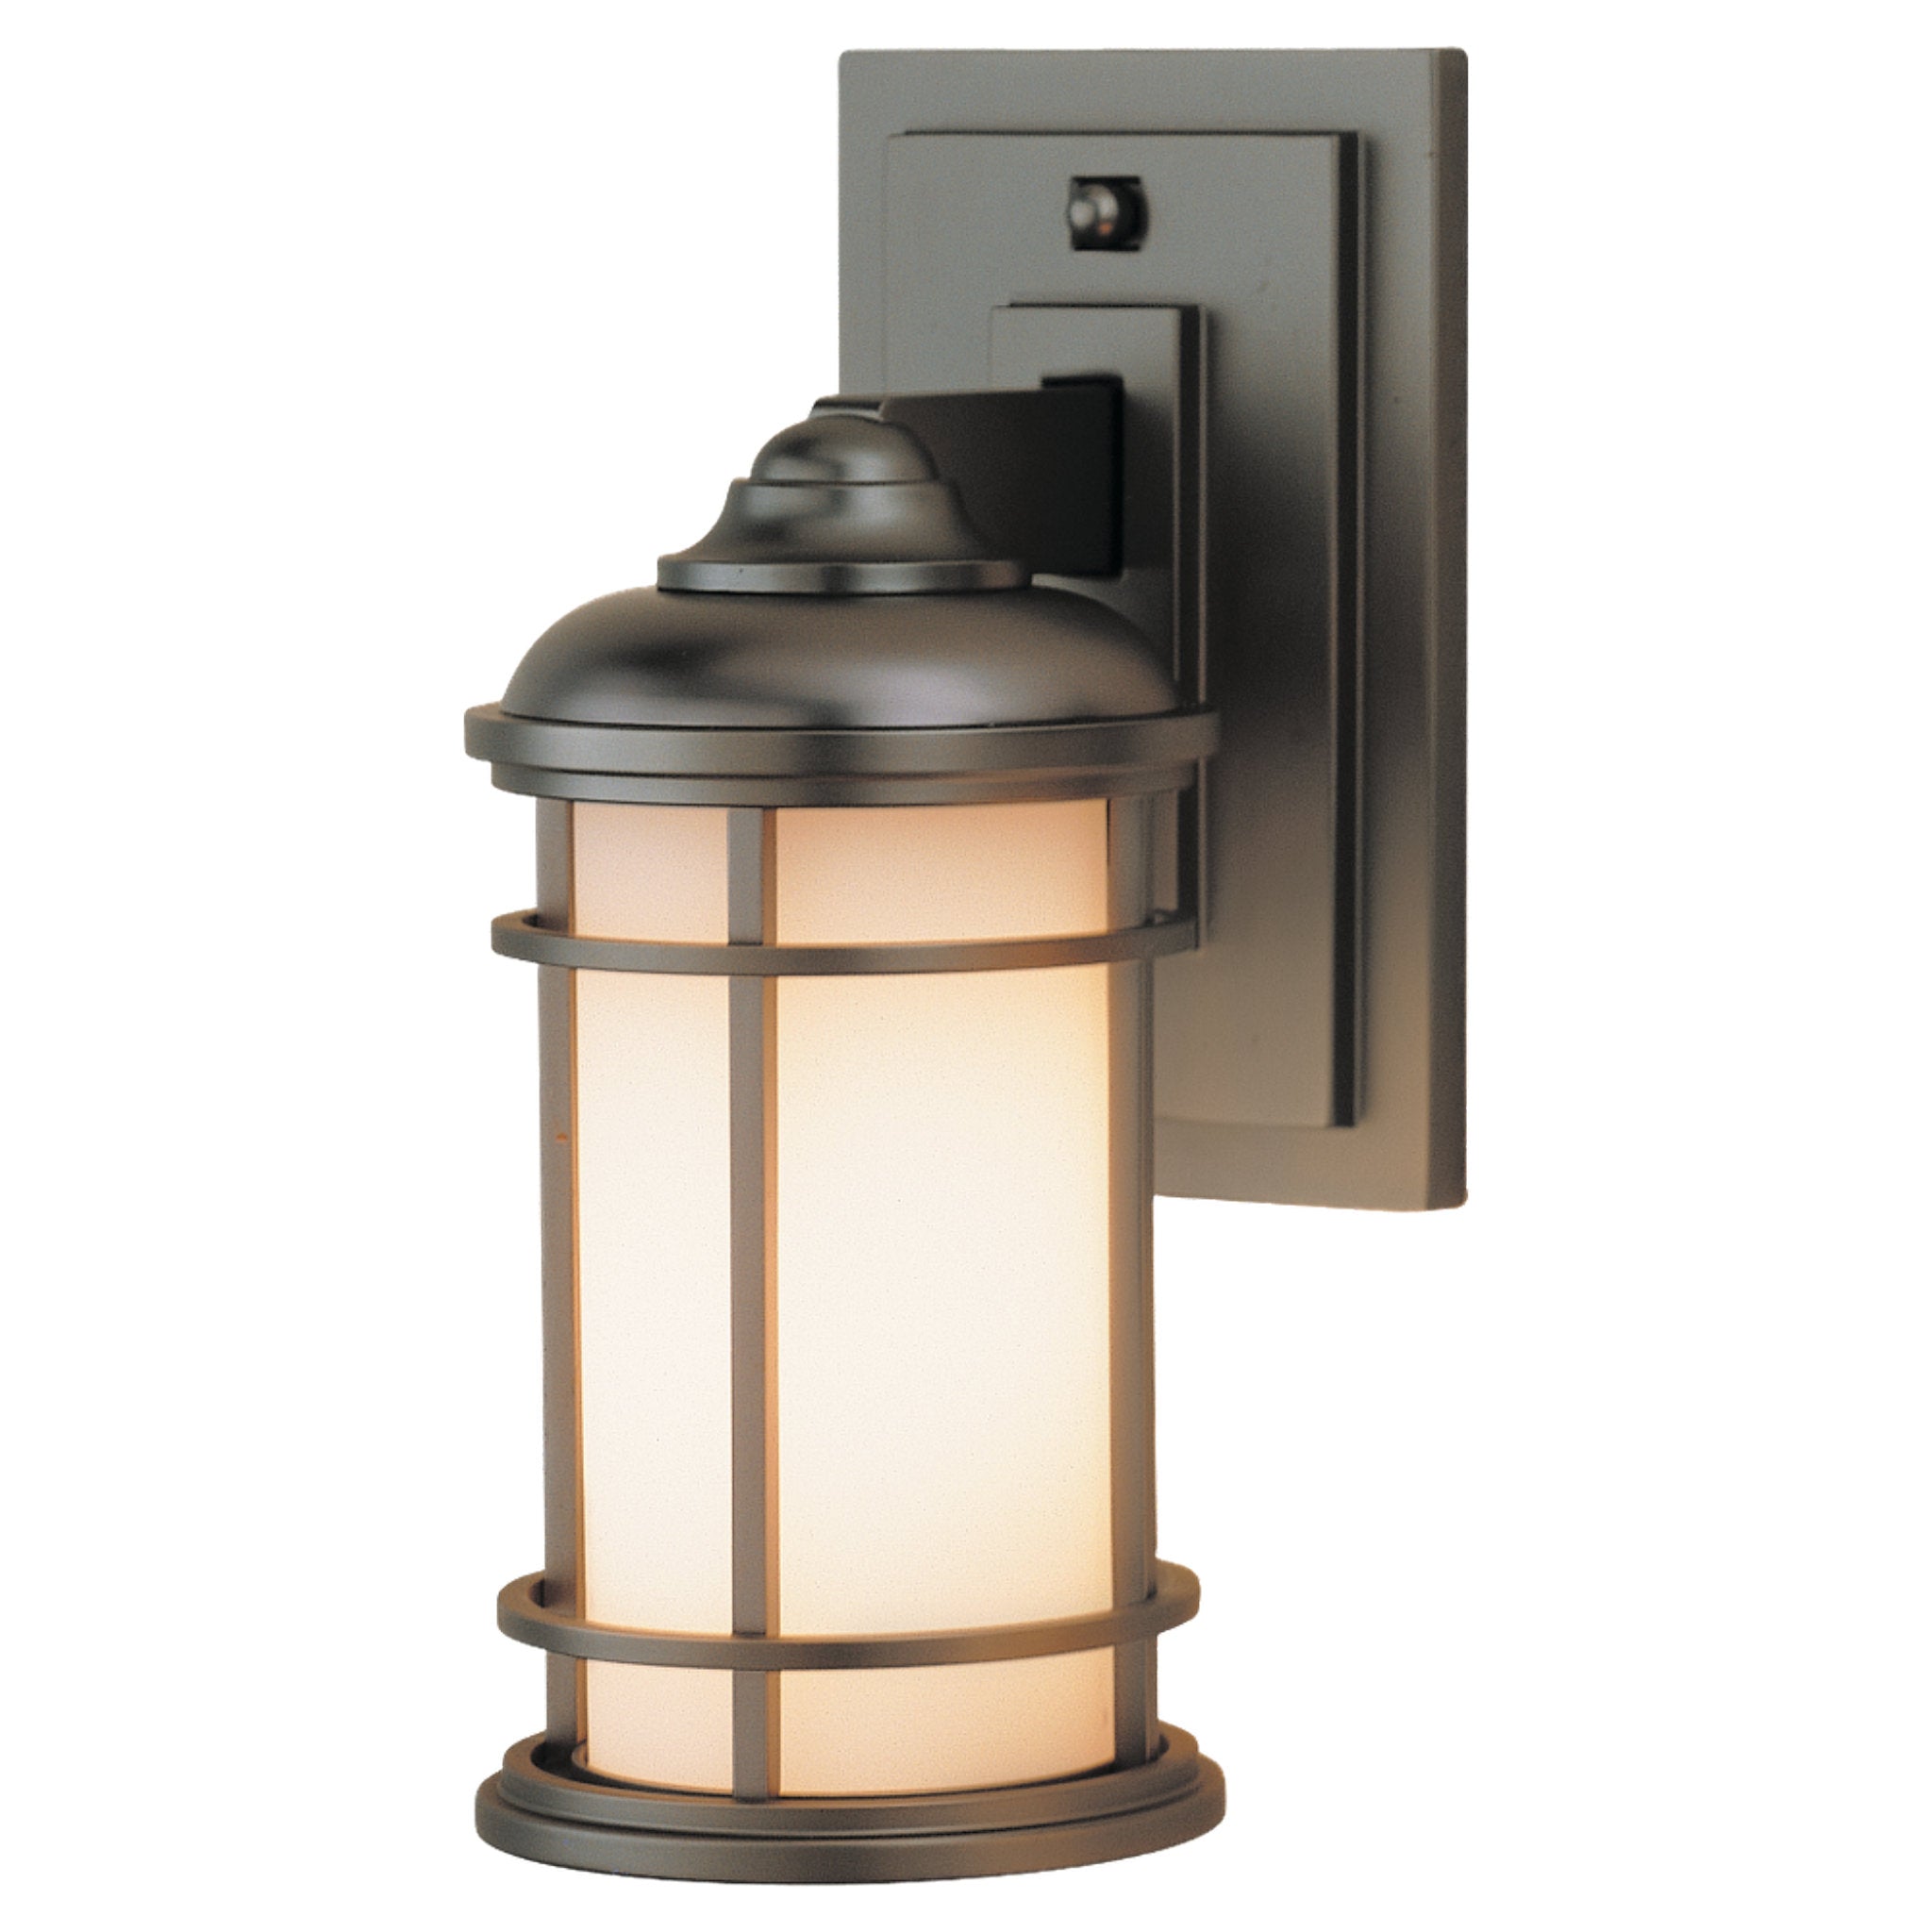 Lighthouse Small Lantern Transitional Outdoor Fixture 4.5" Width 11.125" Height Aluminum Round Opal Etched Shade in Burnished Bronze